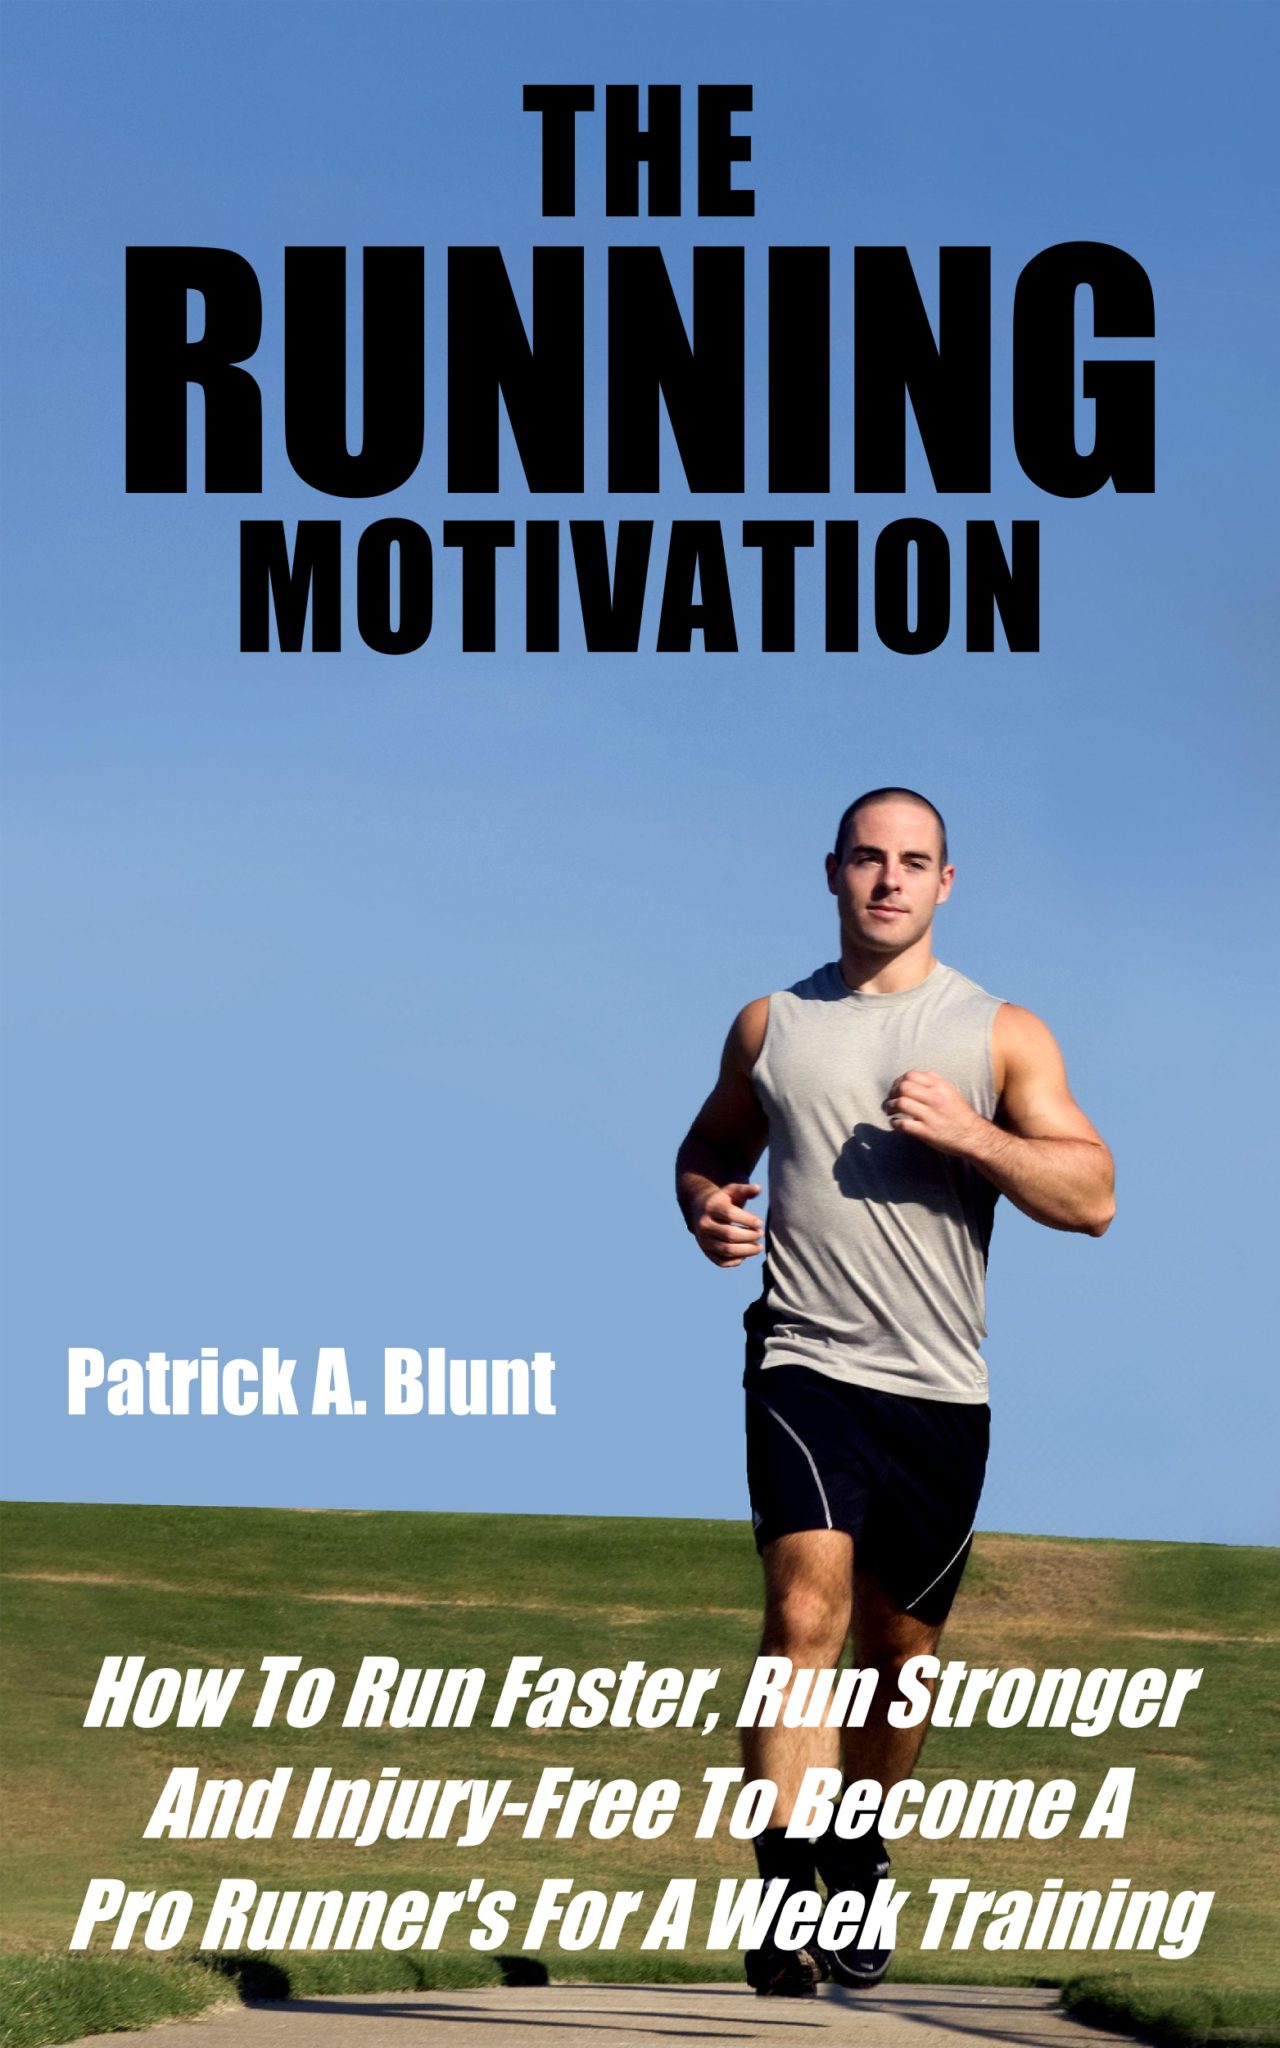 FREE: The Running Motivation: How To Run Faster, Run Stronger And Injury-Free To Become A Pro Runner’s For A Week Training by Patrick A. Blunt